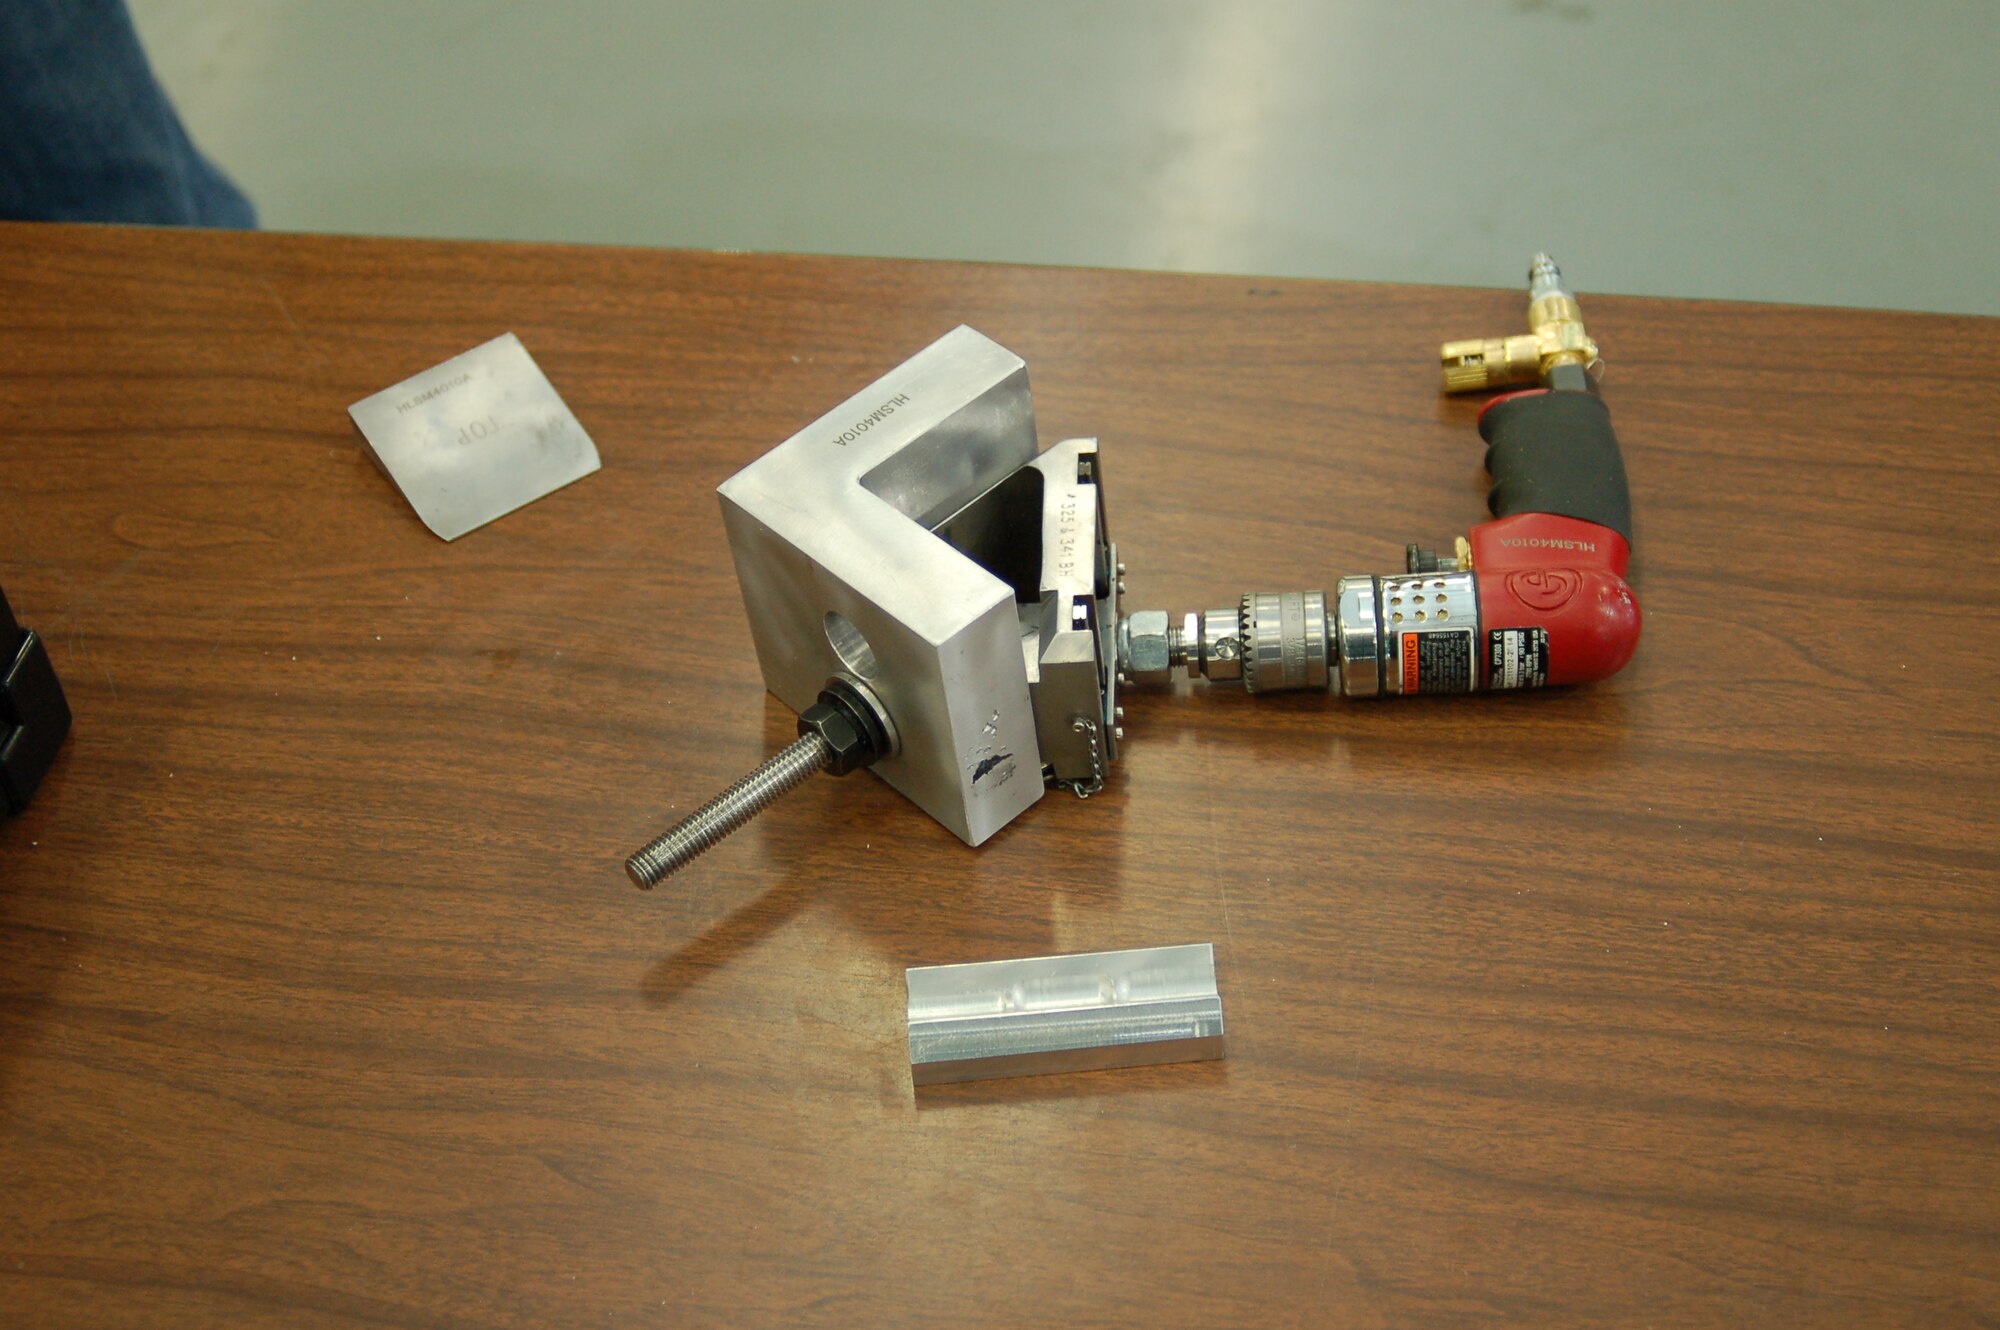 Pictured is the newly-developed blending tool, manufactured at the 309th Commodities Maintenance Group, and used at the Ogden Air Logistics Complex to blend F-16 repairs more accurately at precise depths to ensure structural integrity. The tool is an example of "The AFSC Way" pursuit of speed, safety, and quality.  